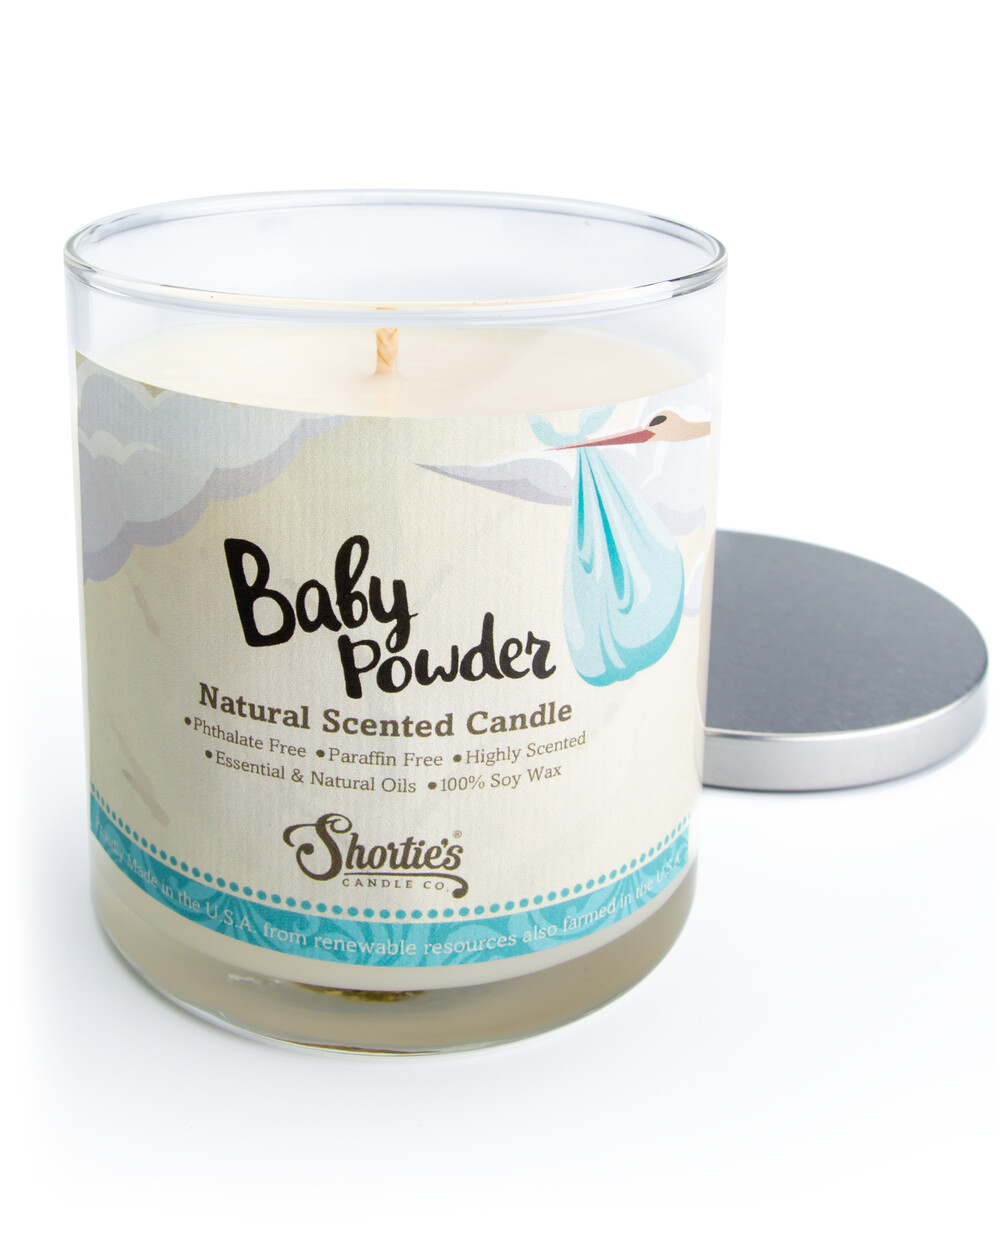 Baby Powder Natural 9 Oz. Soy Candle - Shortie's Candle Company